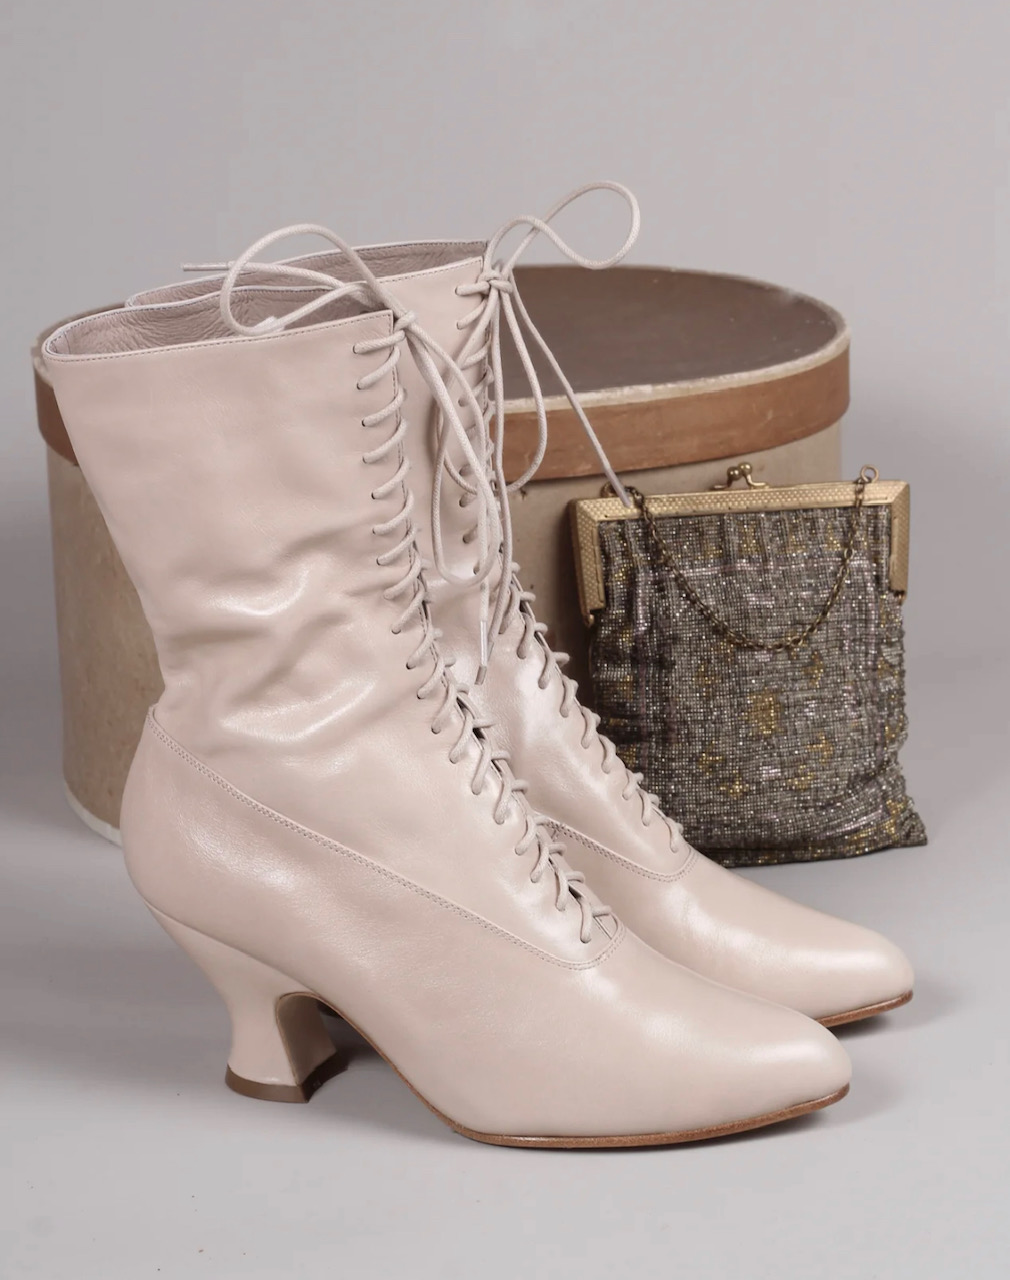 Vintage style replica boots